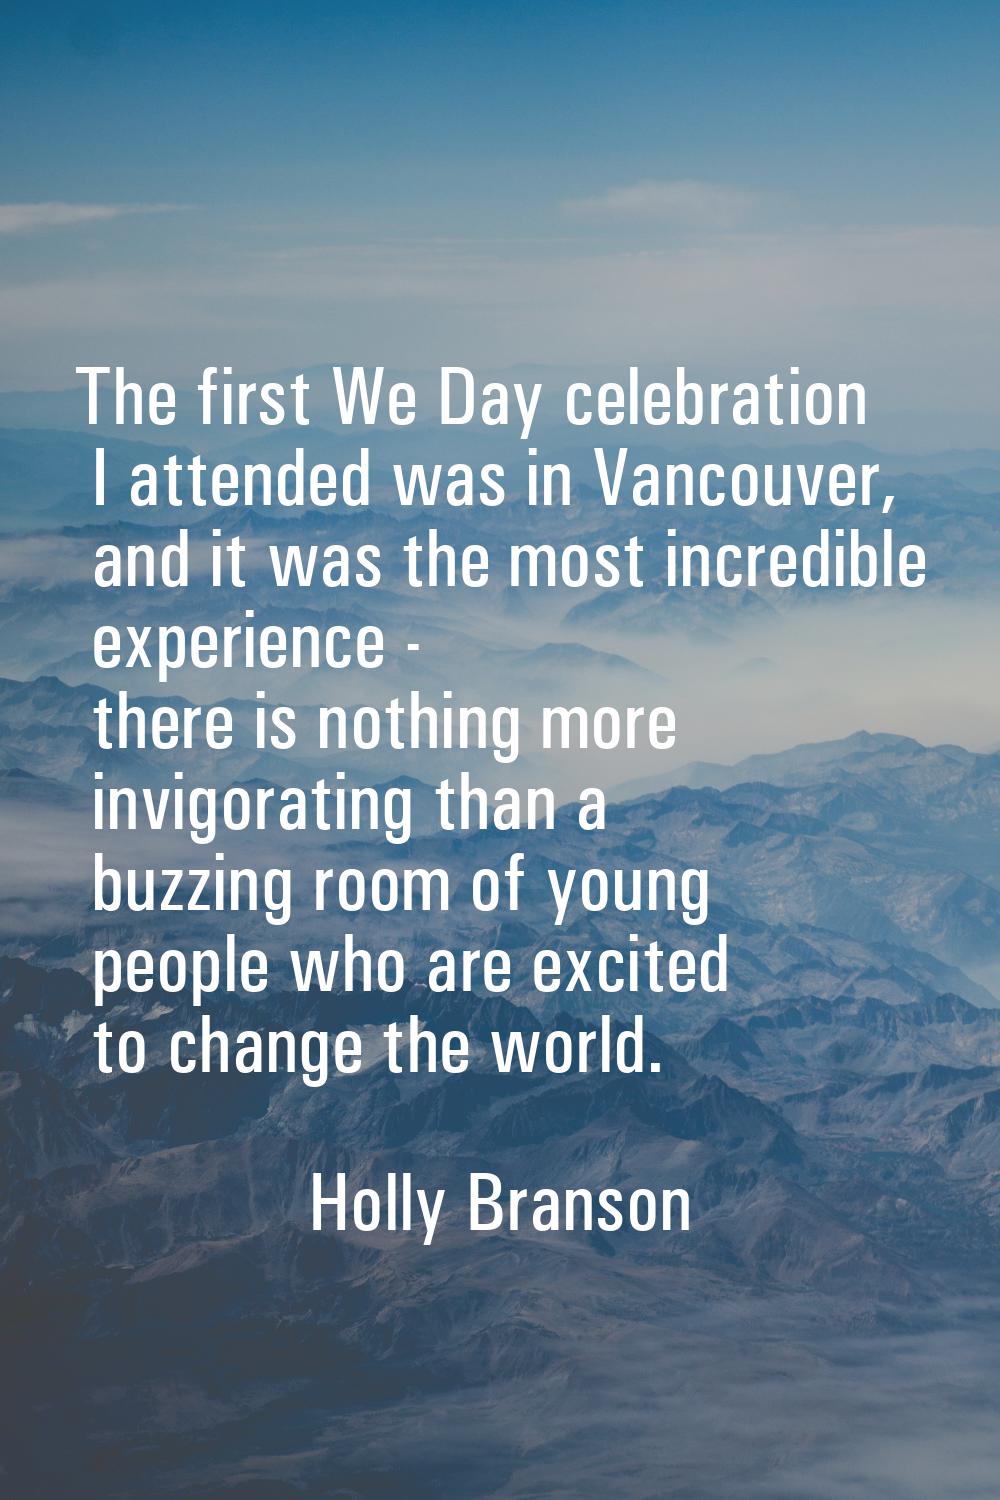 The first We Day celebration I attended was in Vancouver, and it was the most incredible experience